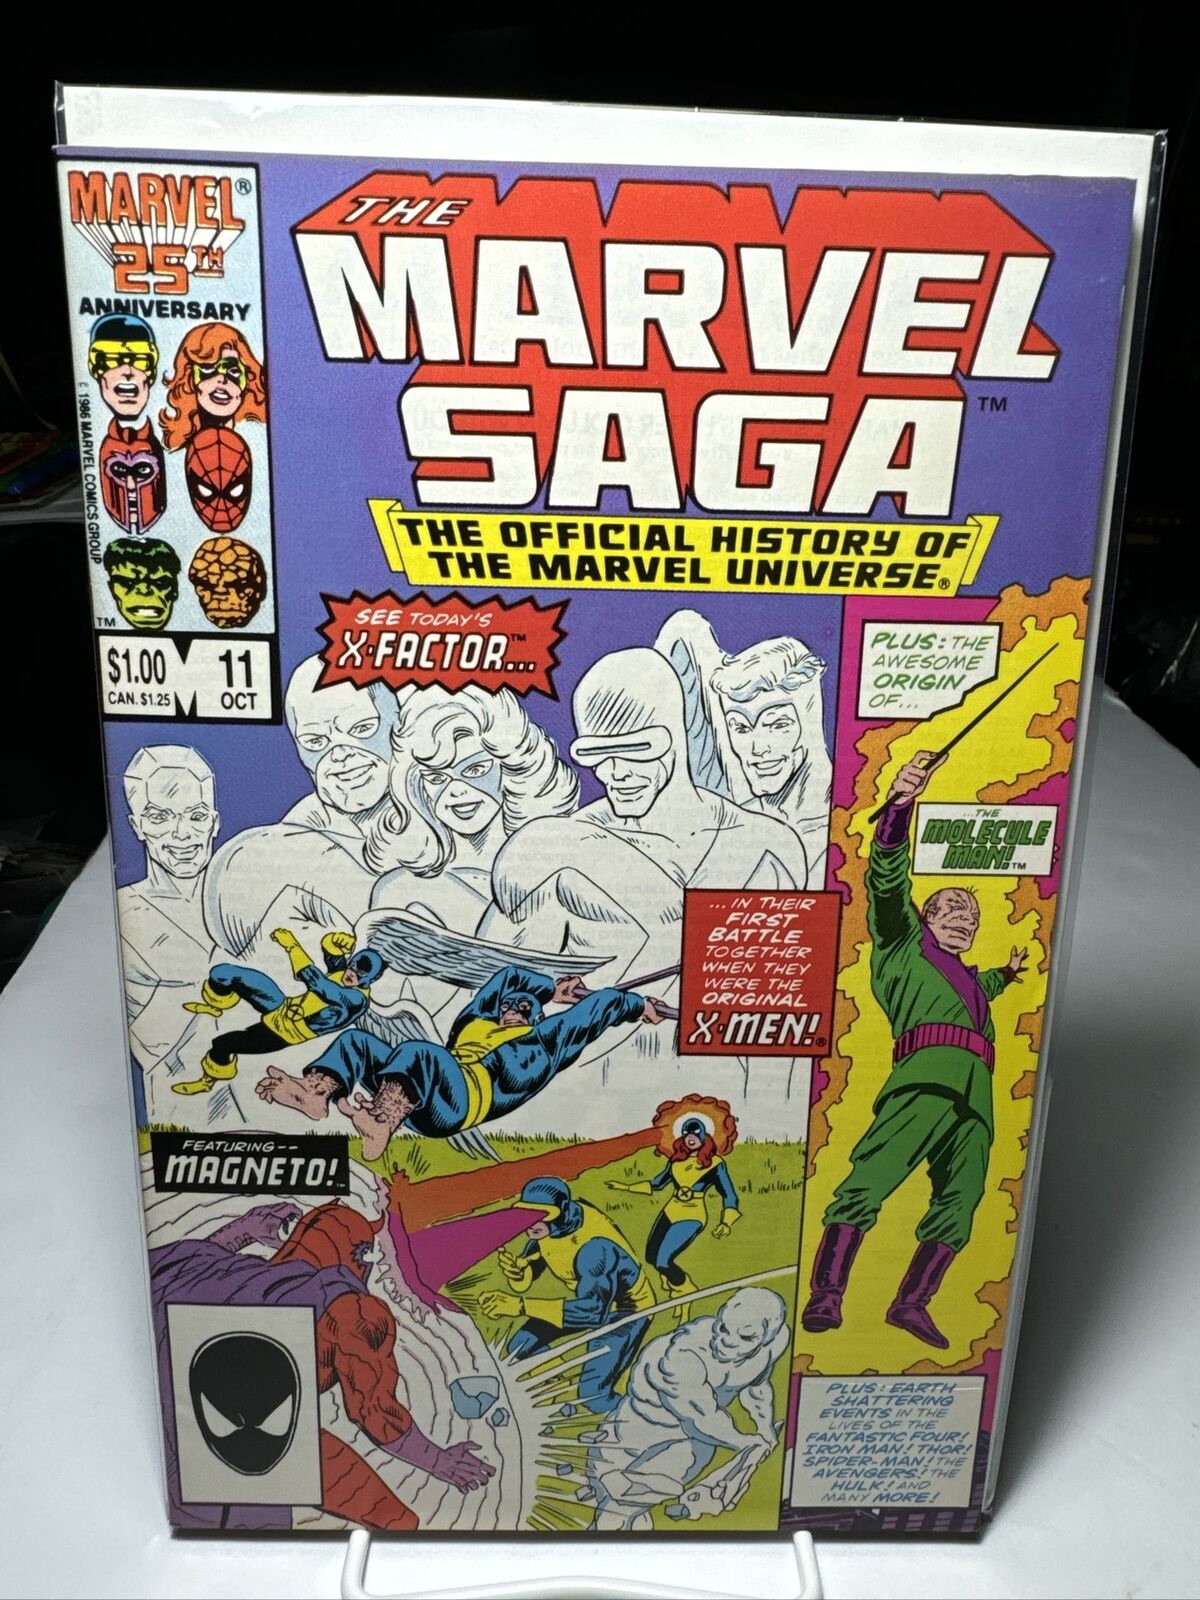 The Marvel Saga The Official History of the Marvel Universe #11 - 1986